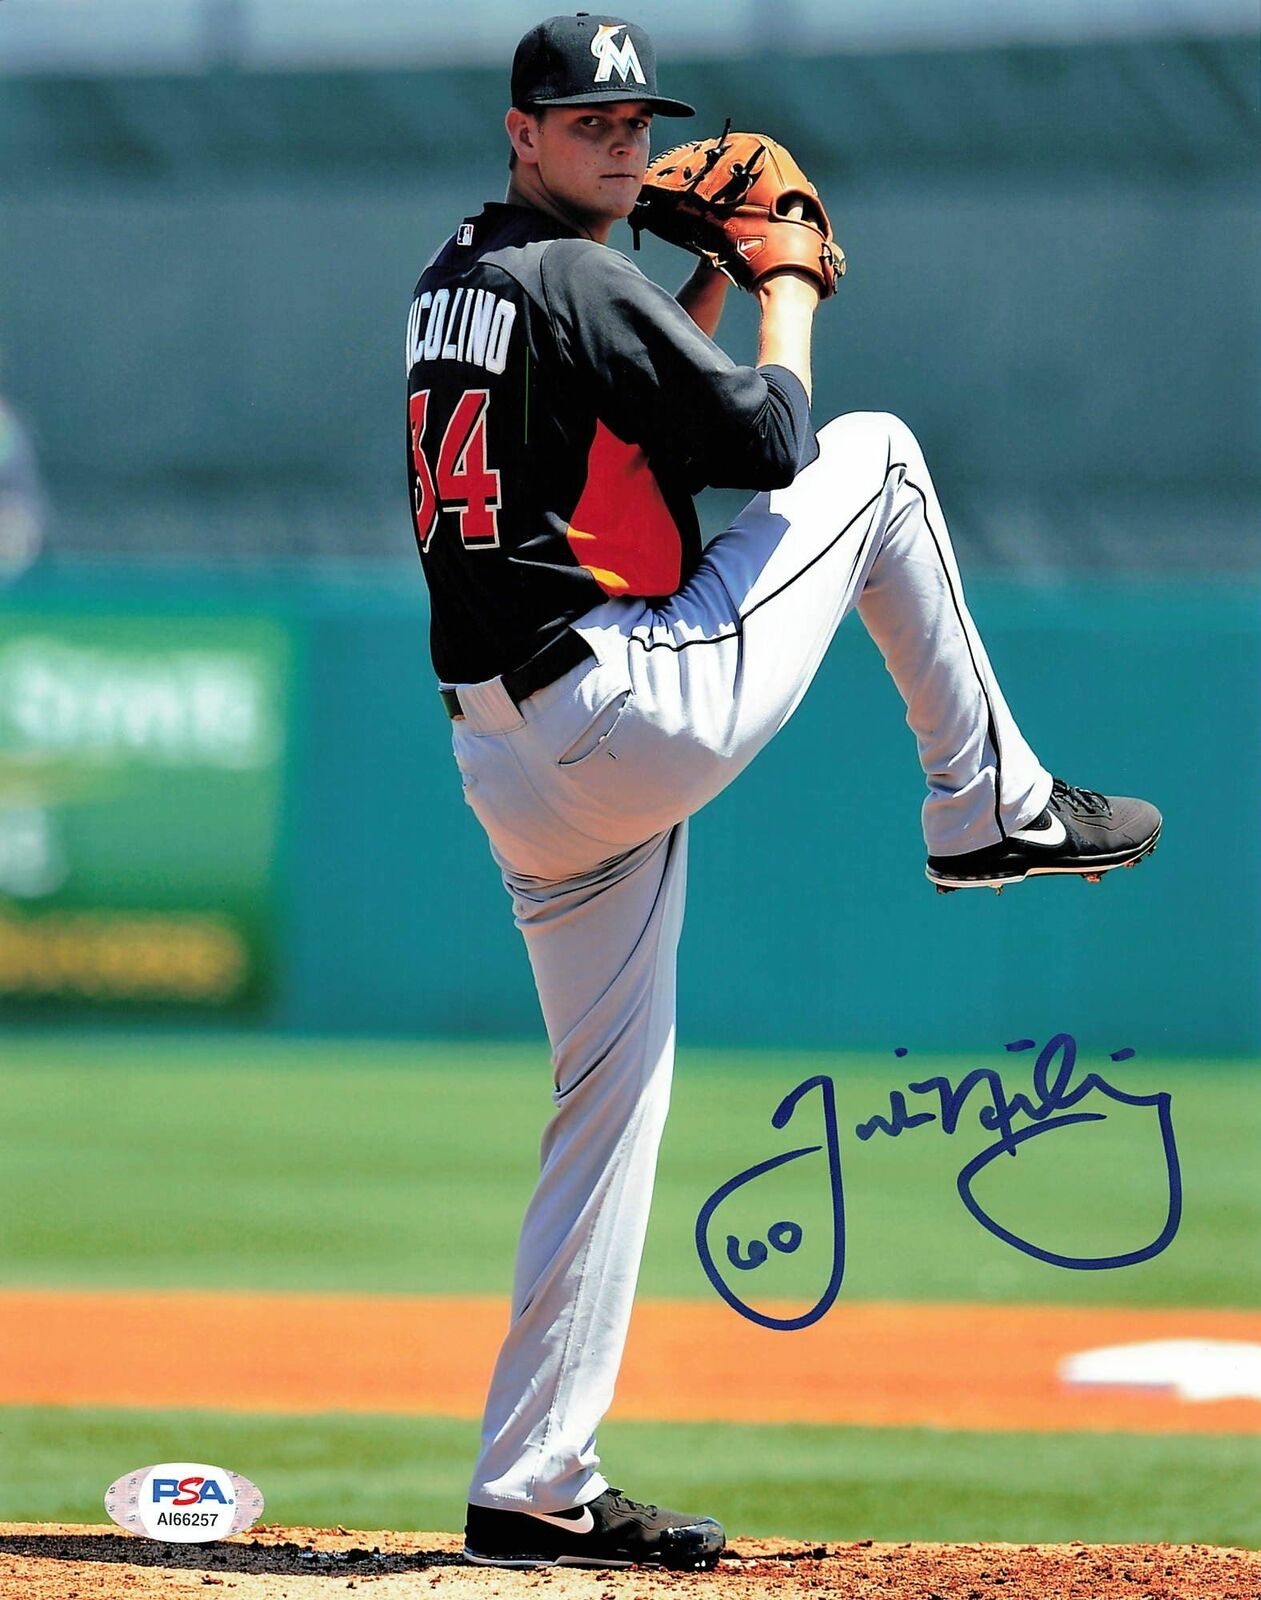 Justin Nicolino Signed 8x10 Photo Poster painting PSA/DNA Miami Marlins Autographed